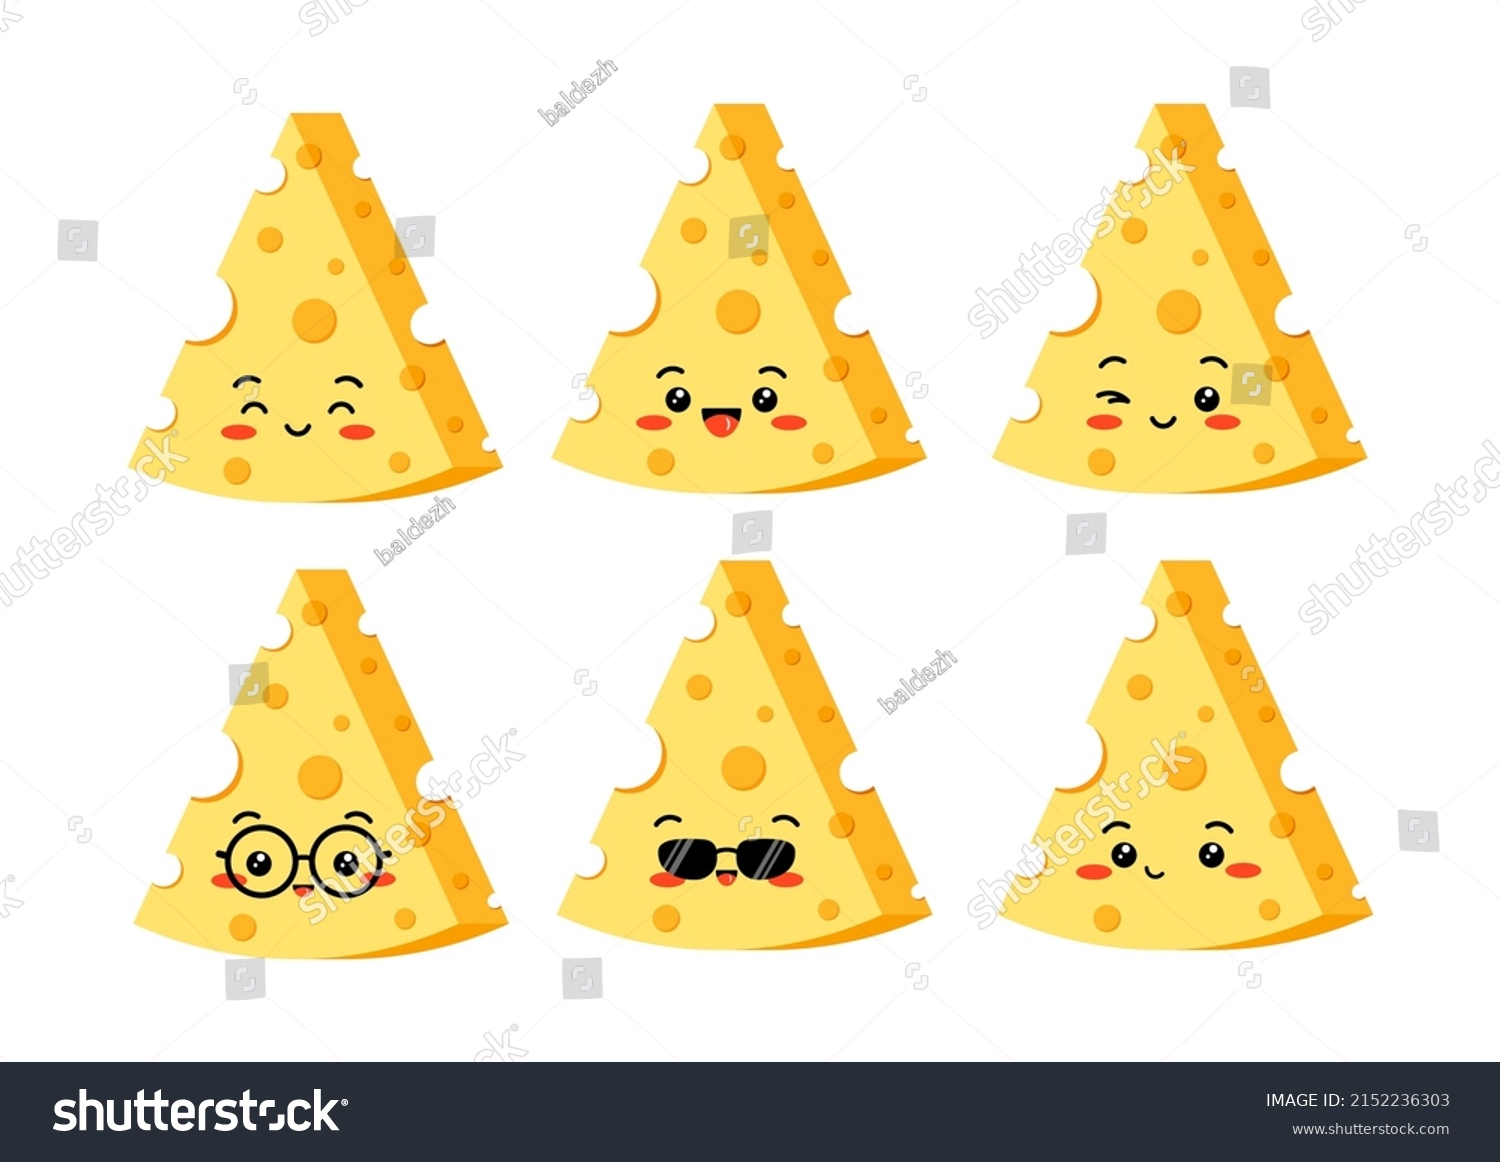 SVG of Triangle cheese with hole slices emoji vector set isolated on white background. Kawaii cute triangular pieces of yellow cheese character. Organic milk food cartoon style illustration. svg